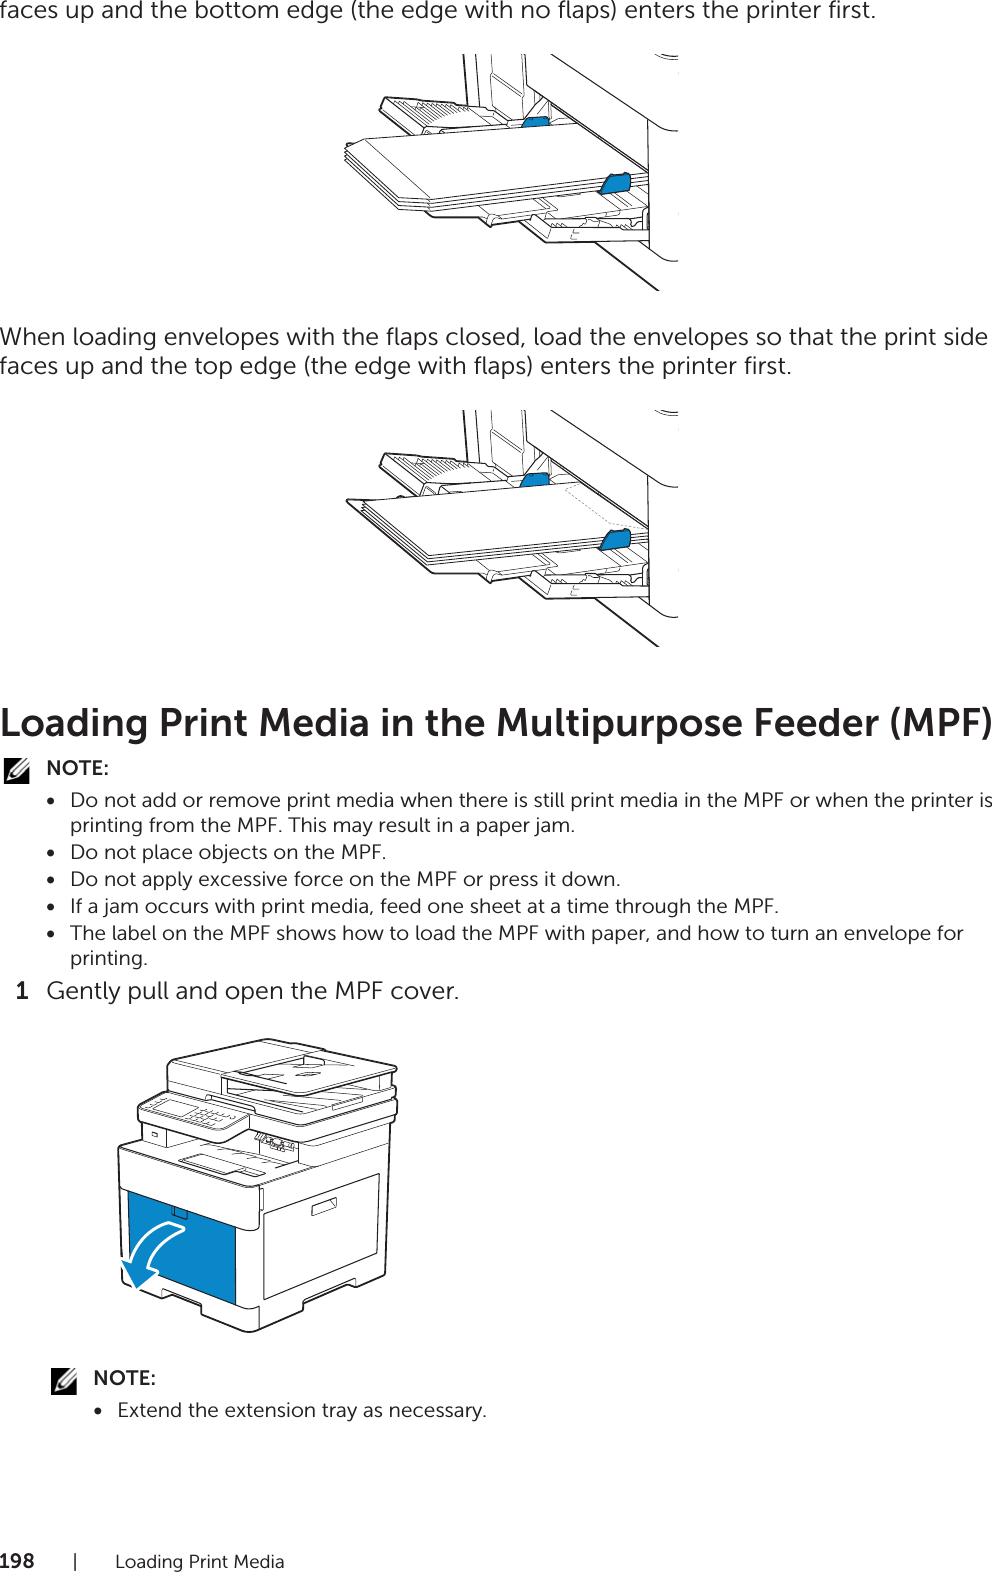 198| Loading Print Mediafaces up and the bottom edge (the edge with no flaps) enters the printer first.When loading envelopes with the flaps closed, load the envelopes so that the print side faces up and the top edge (the edge with flaps) enters the printer first.Loading Print Media in the Multipurpose Feeder (MPF)NOTE:•Do not add or remove print media when there is still print media in the MPF or when the printer is printing from the MPF. This may result in a paper jam.•Do not place objects on the MPF.•Do not apply excessive force on the MPF or press it down.•If a jam occurs with print media, feed one sheet at a time through the MPF.•The label on the MPF shows how to load the MPF with paper, and how to turn an envelope for printing.1Gently pull and open the MPF cover.NOTE:•Extend the extension tray as necessary.